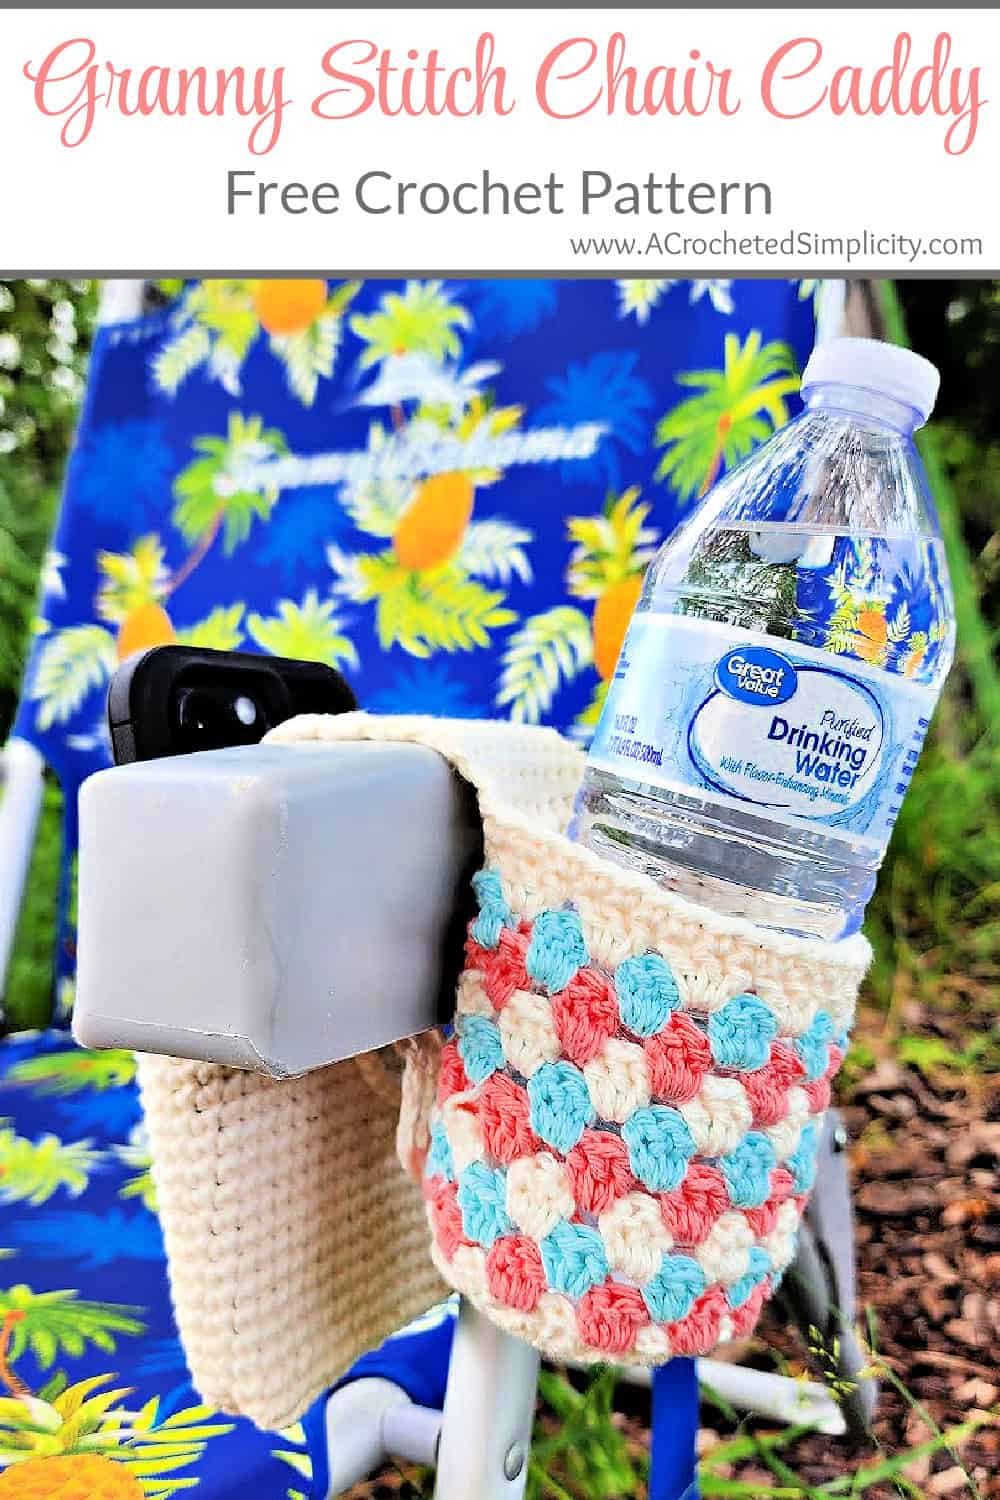 Crochet chair caddy in granny stitch to hold a water bottle and cell phone.